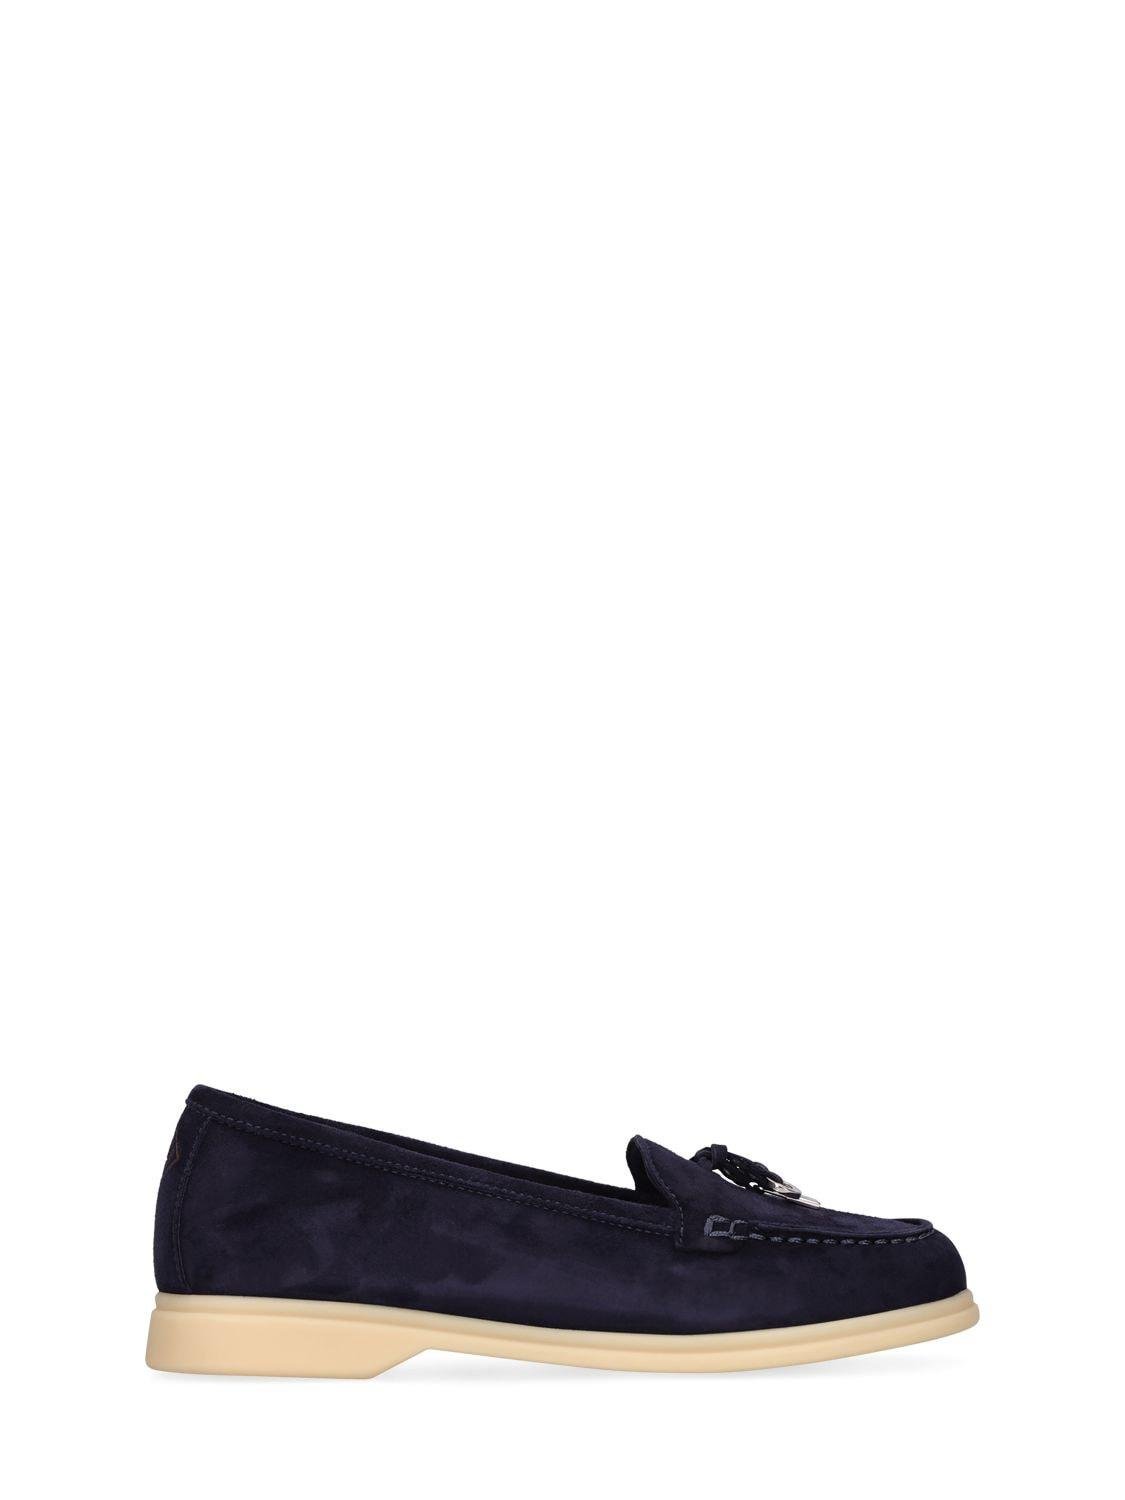 Suede Loafers W/ Charms by LORO PIANA